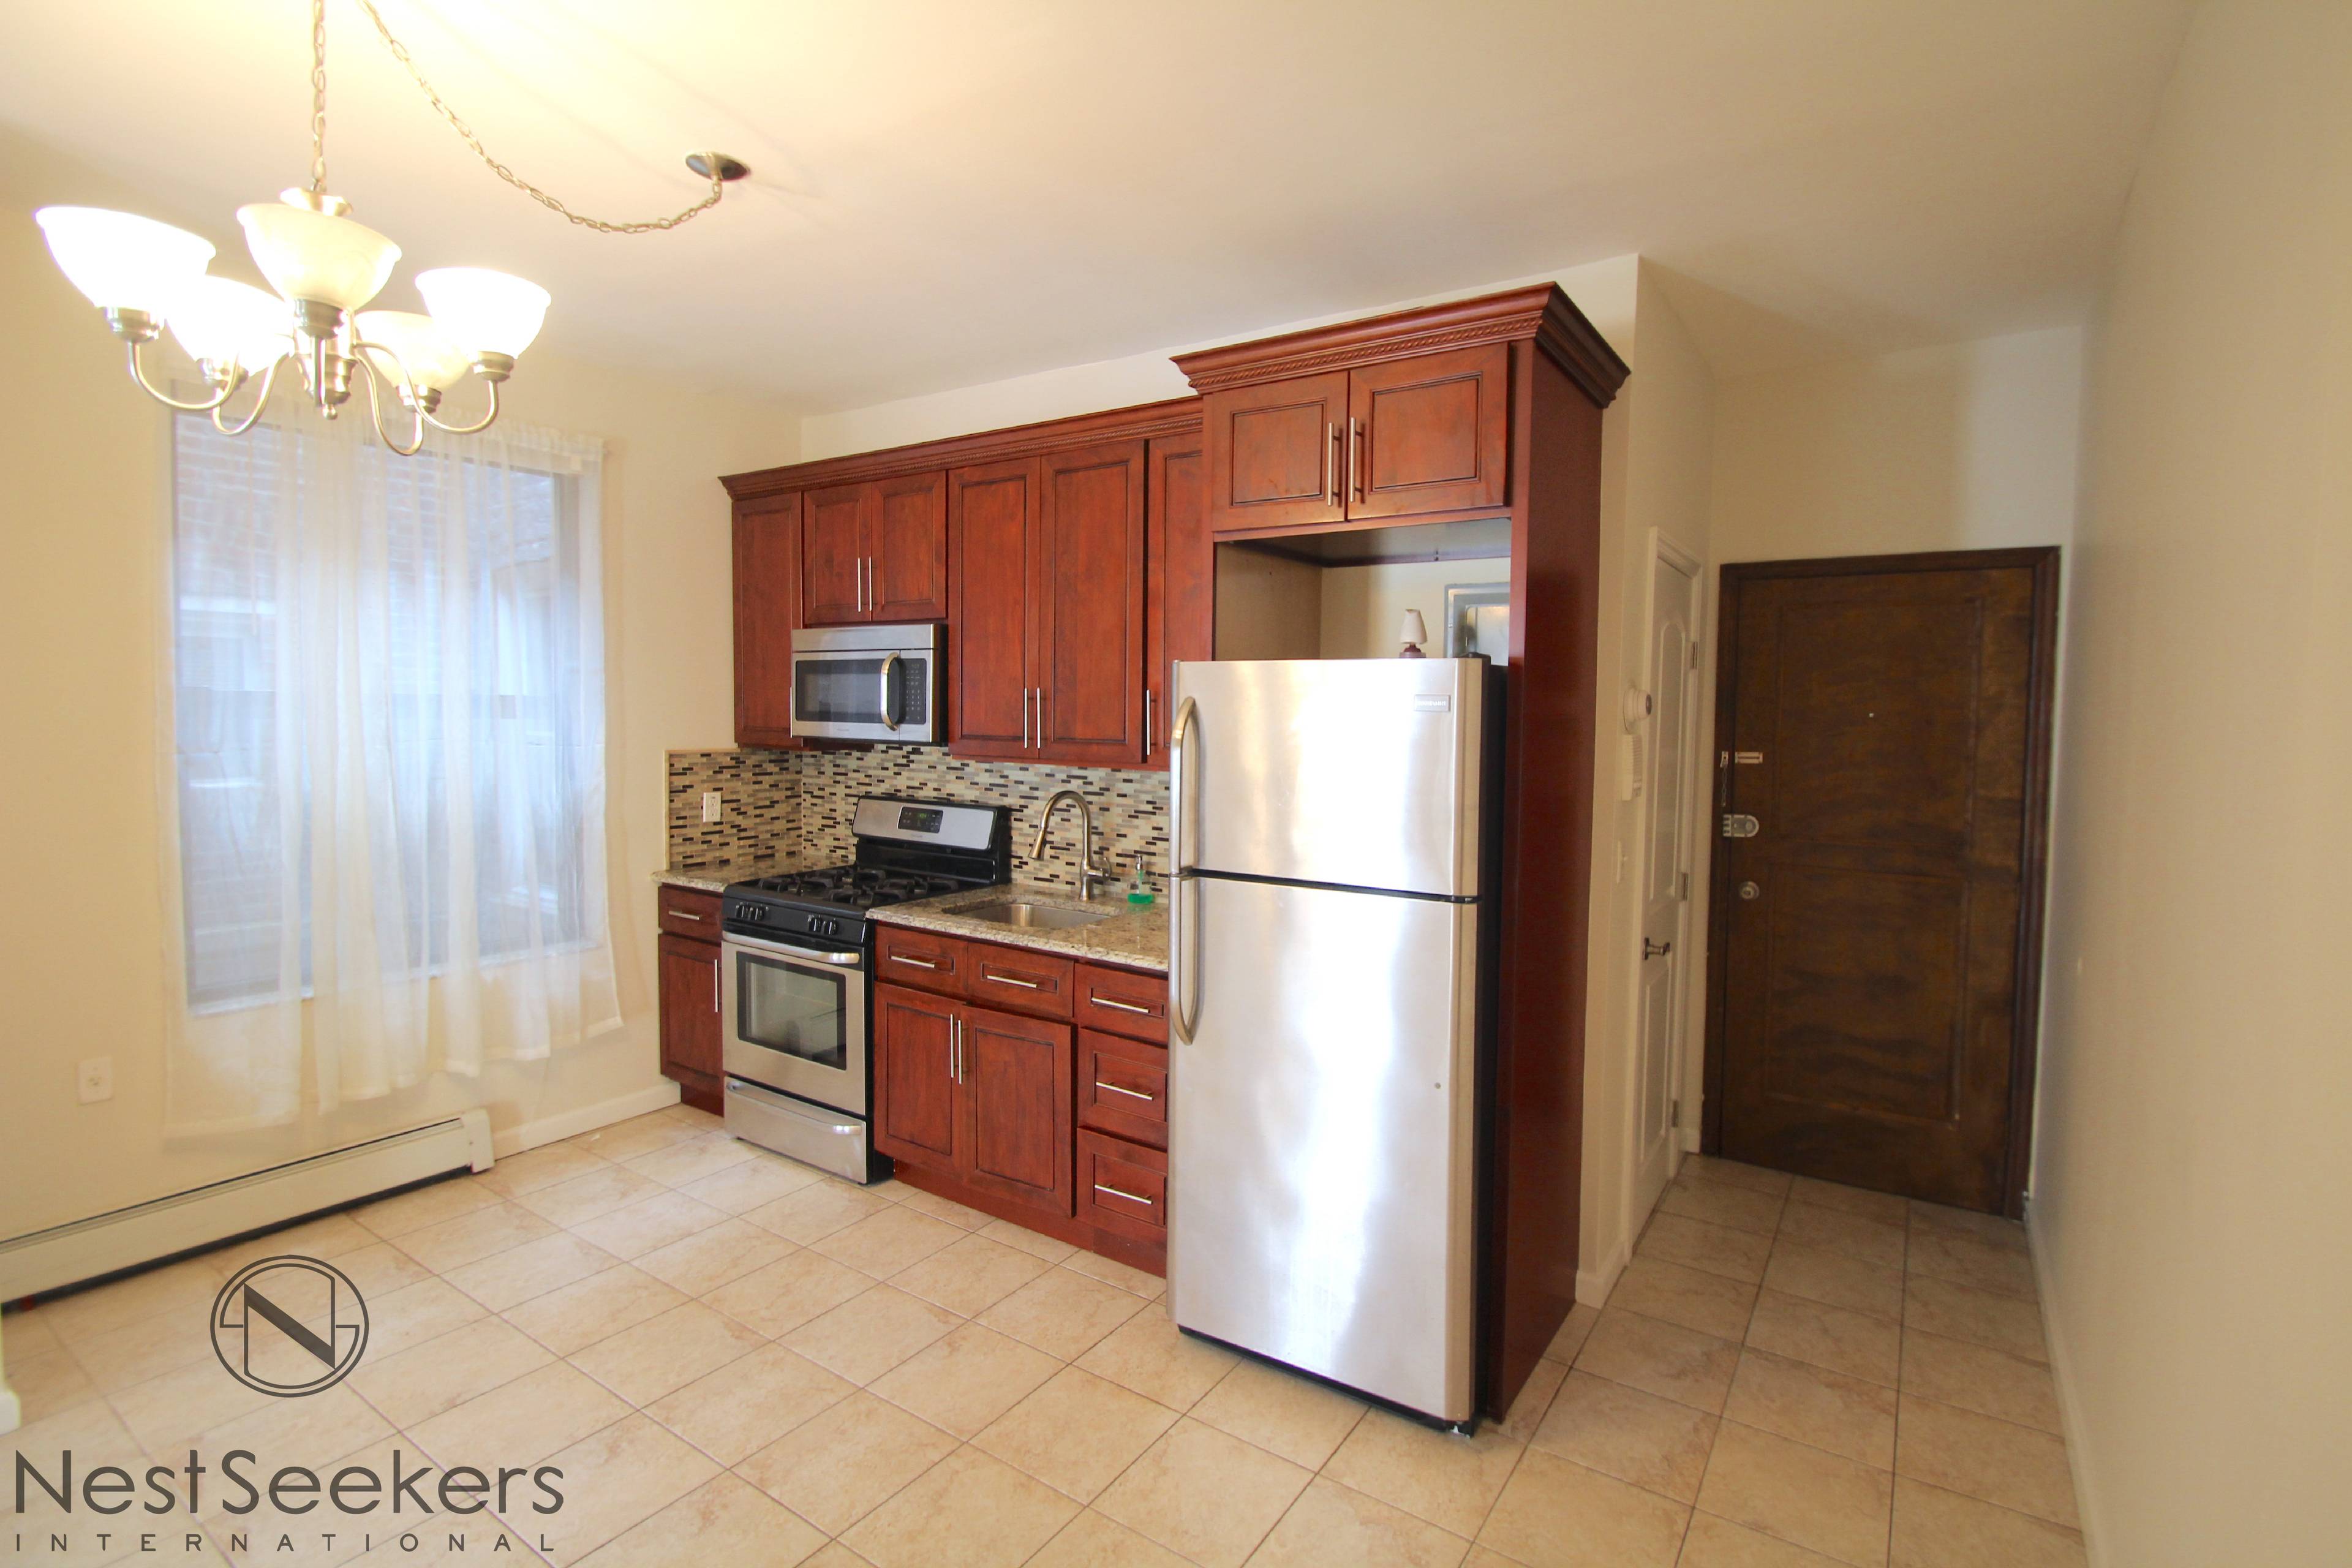 Astoria: Renovated 2 Bedroom w/ Stainless Steel Appliances, New Floors, New Electric & New Bath